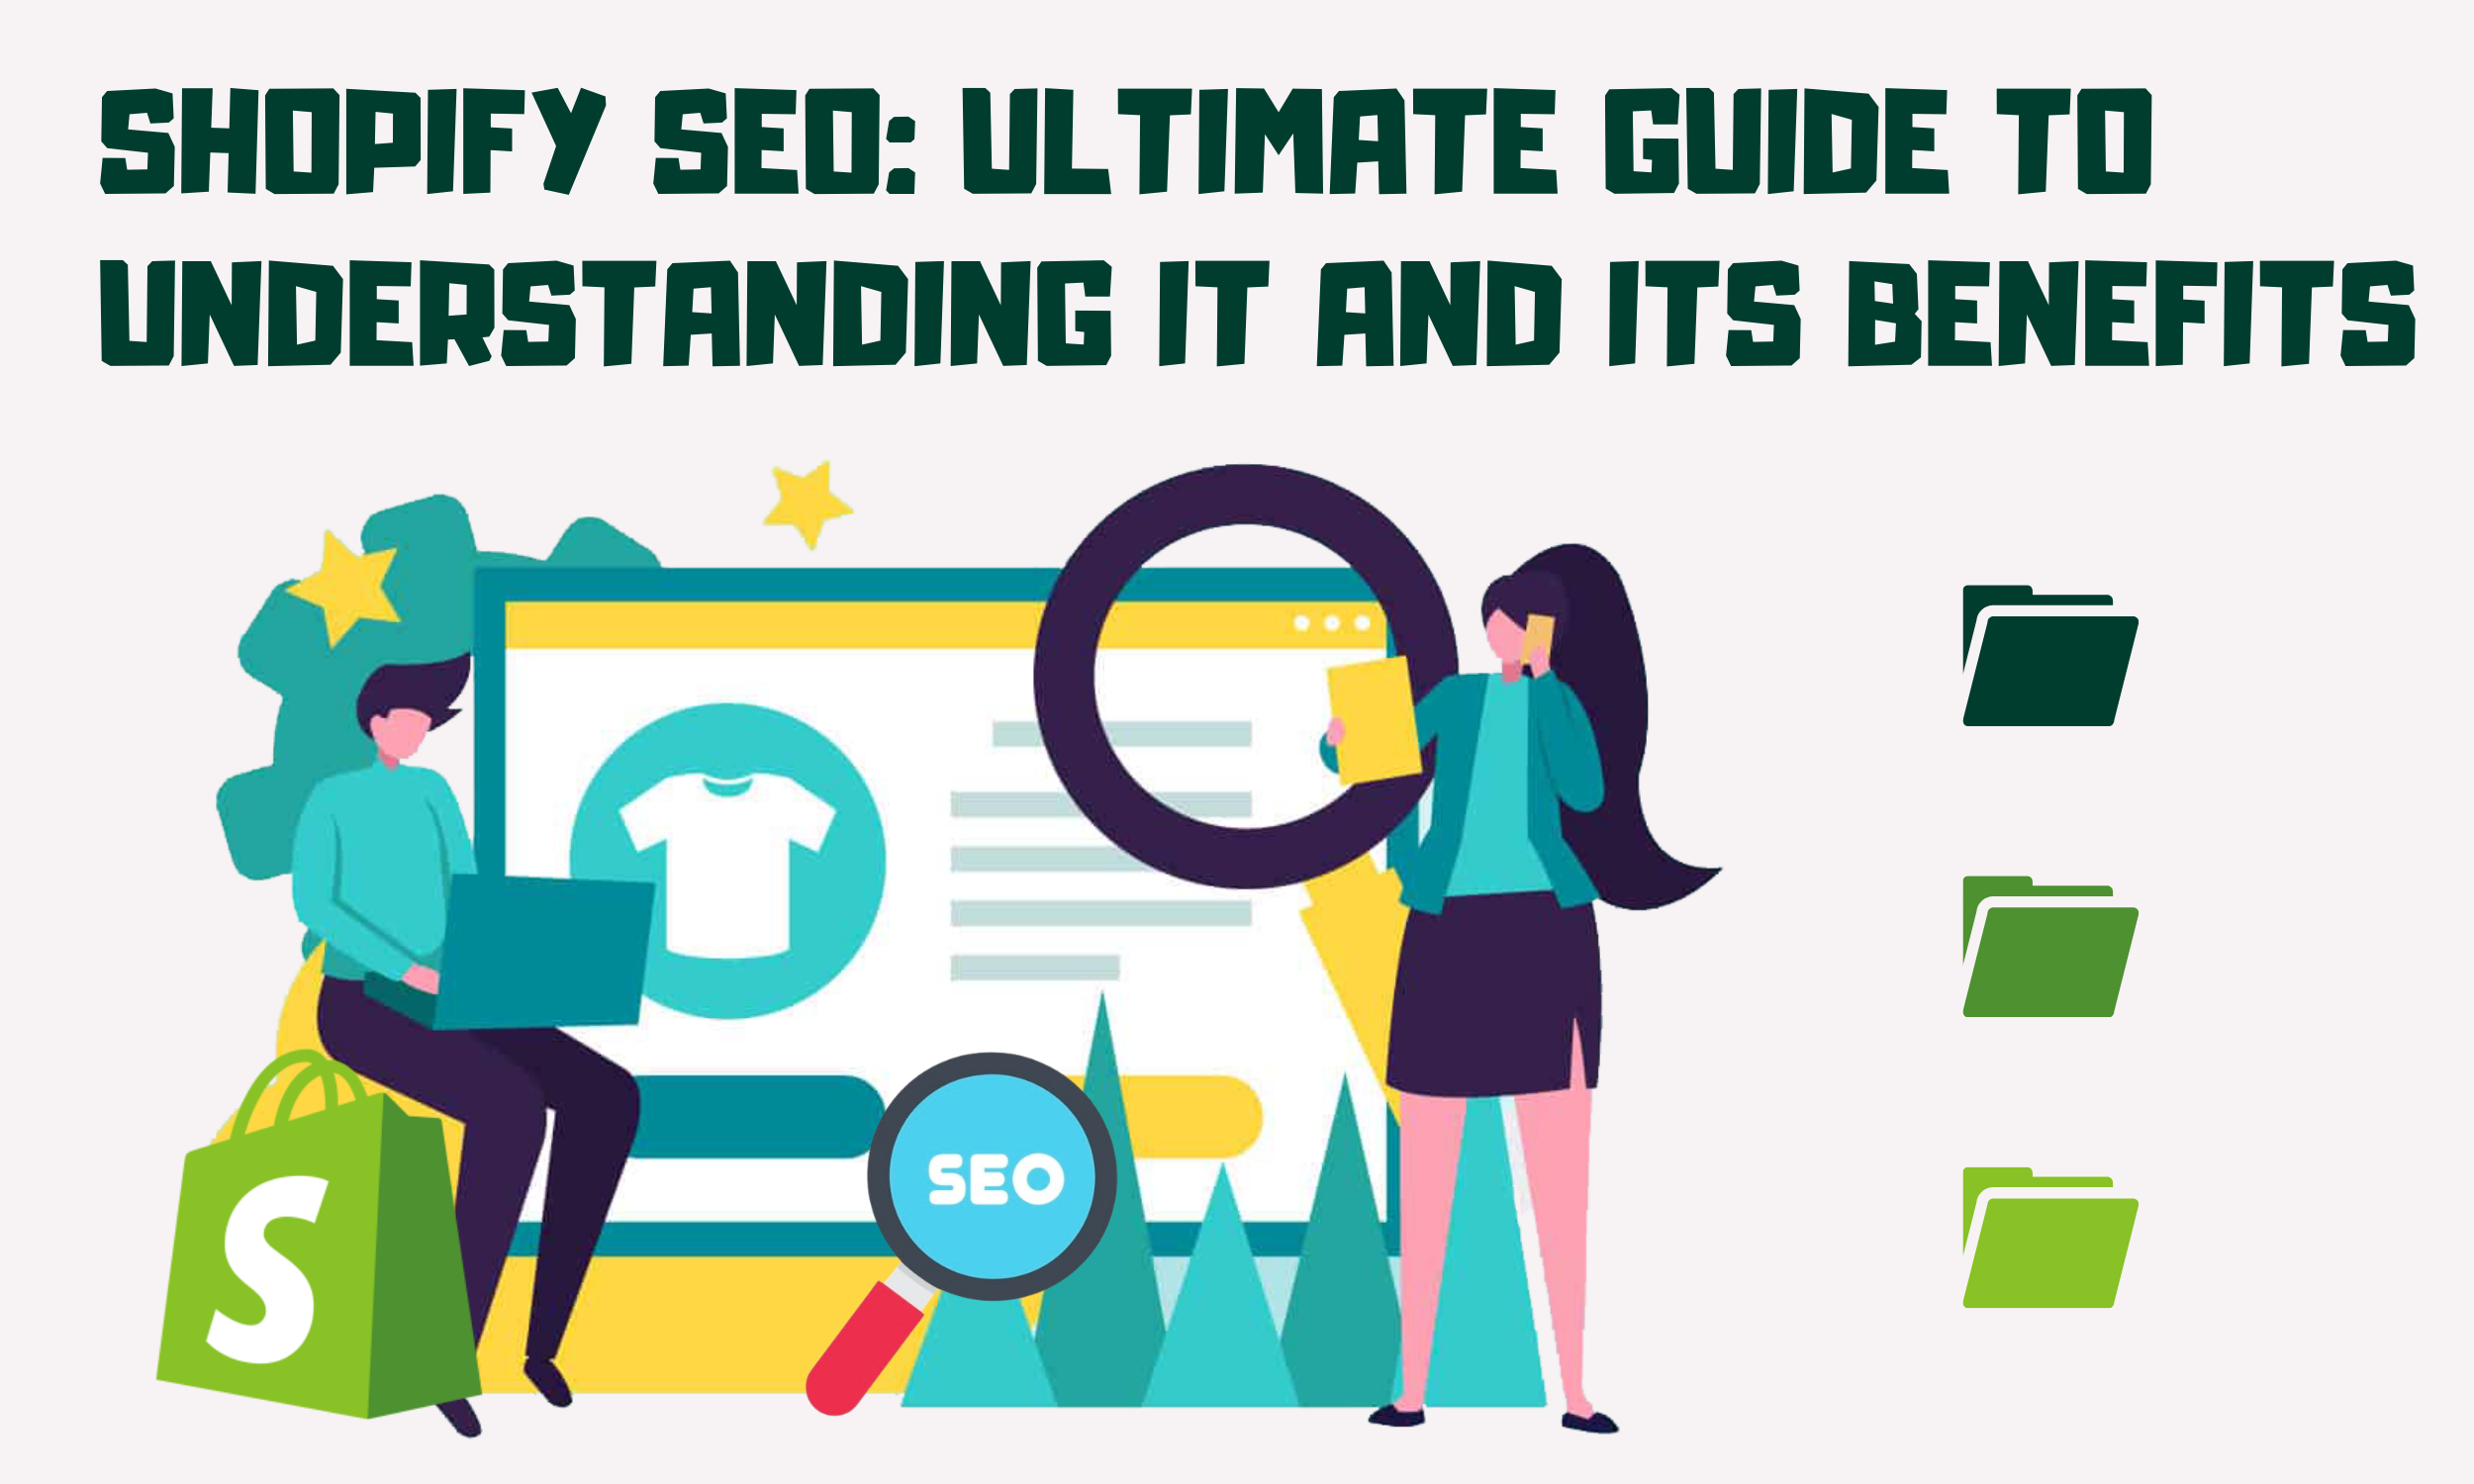 Shopify SEO: Ultimate Guide To Understanding It And Its Benefits